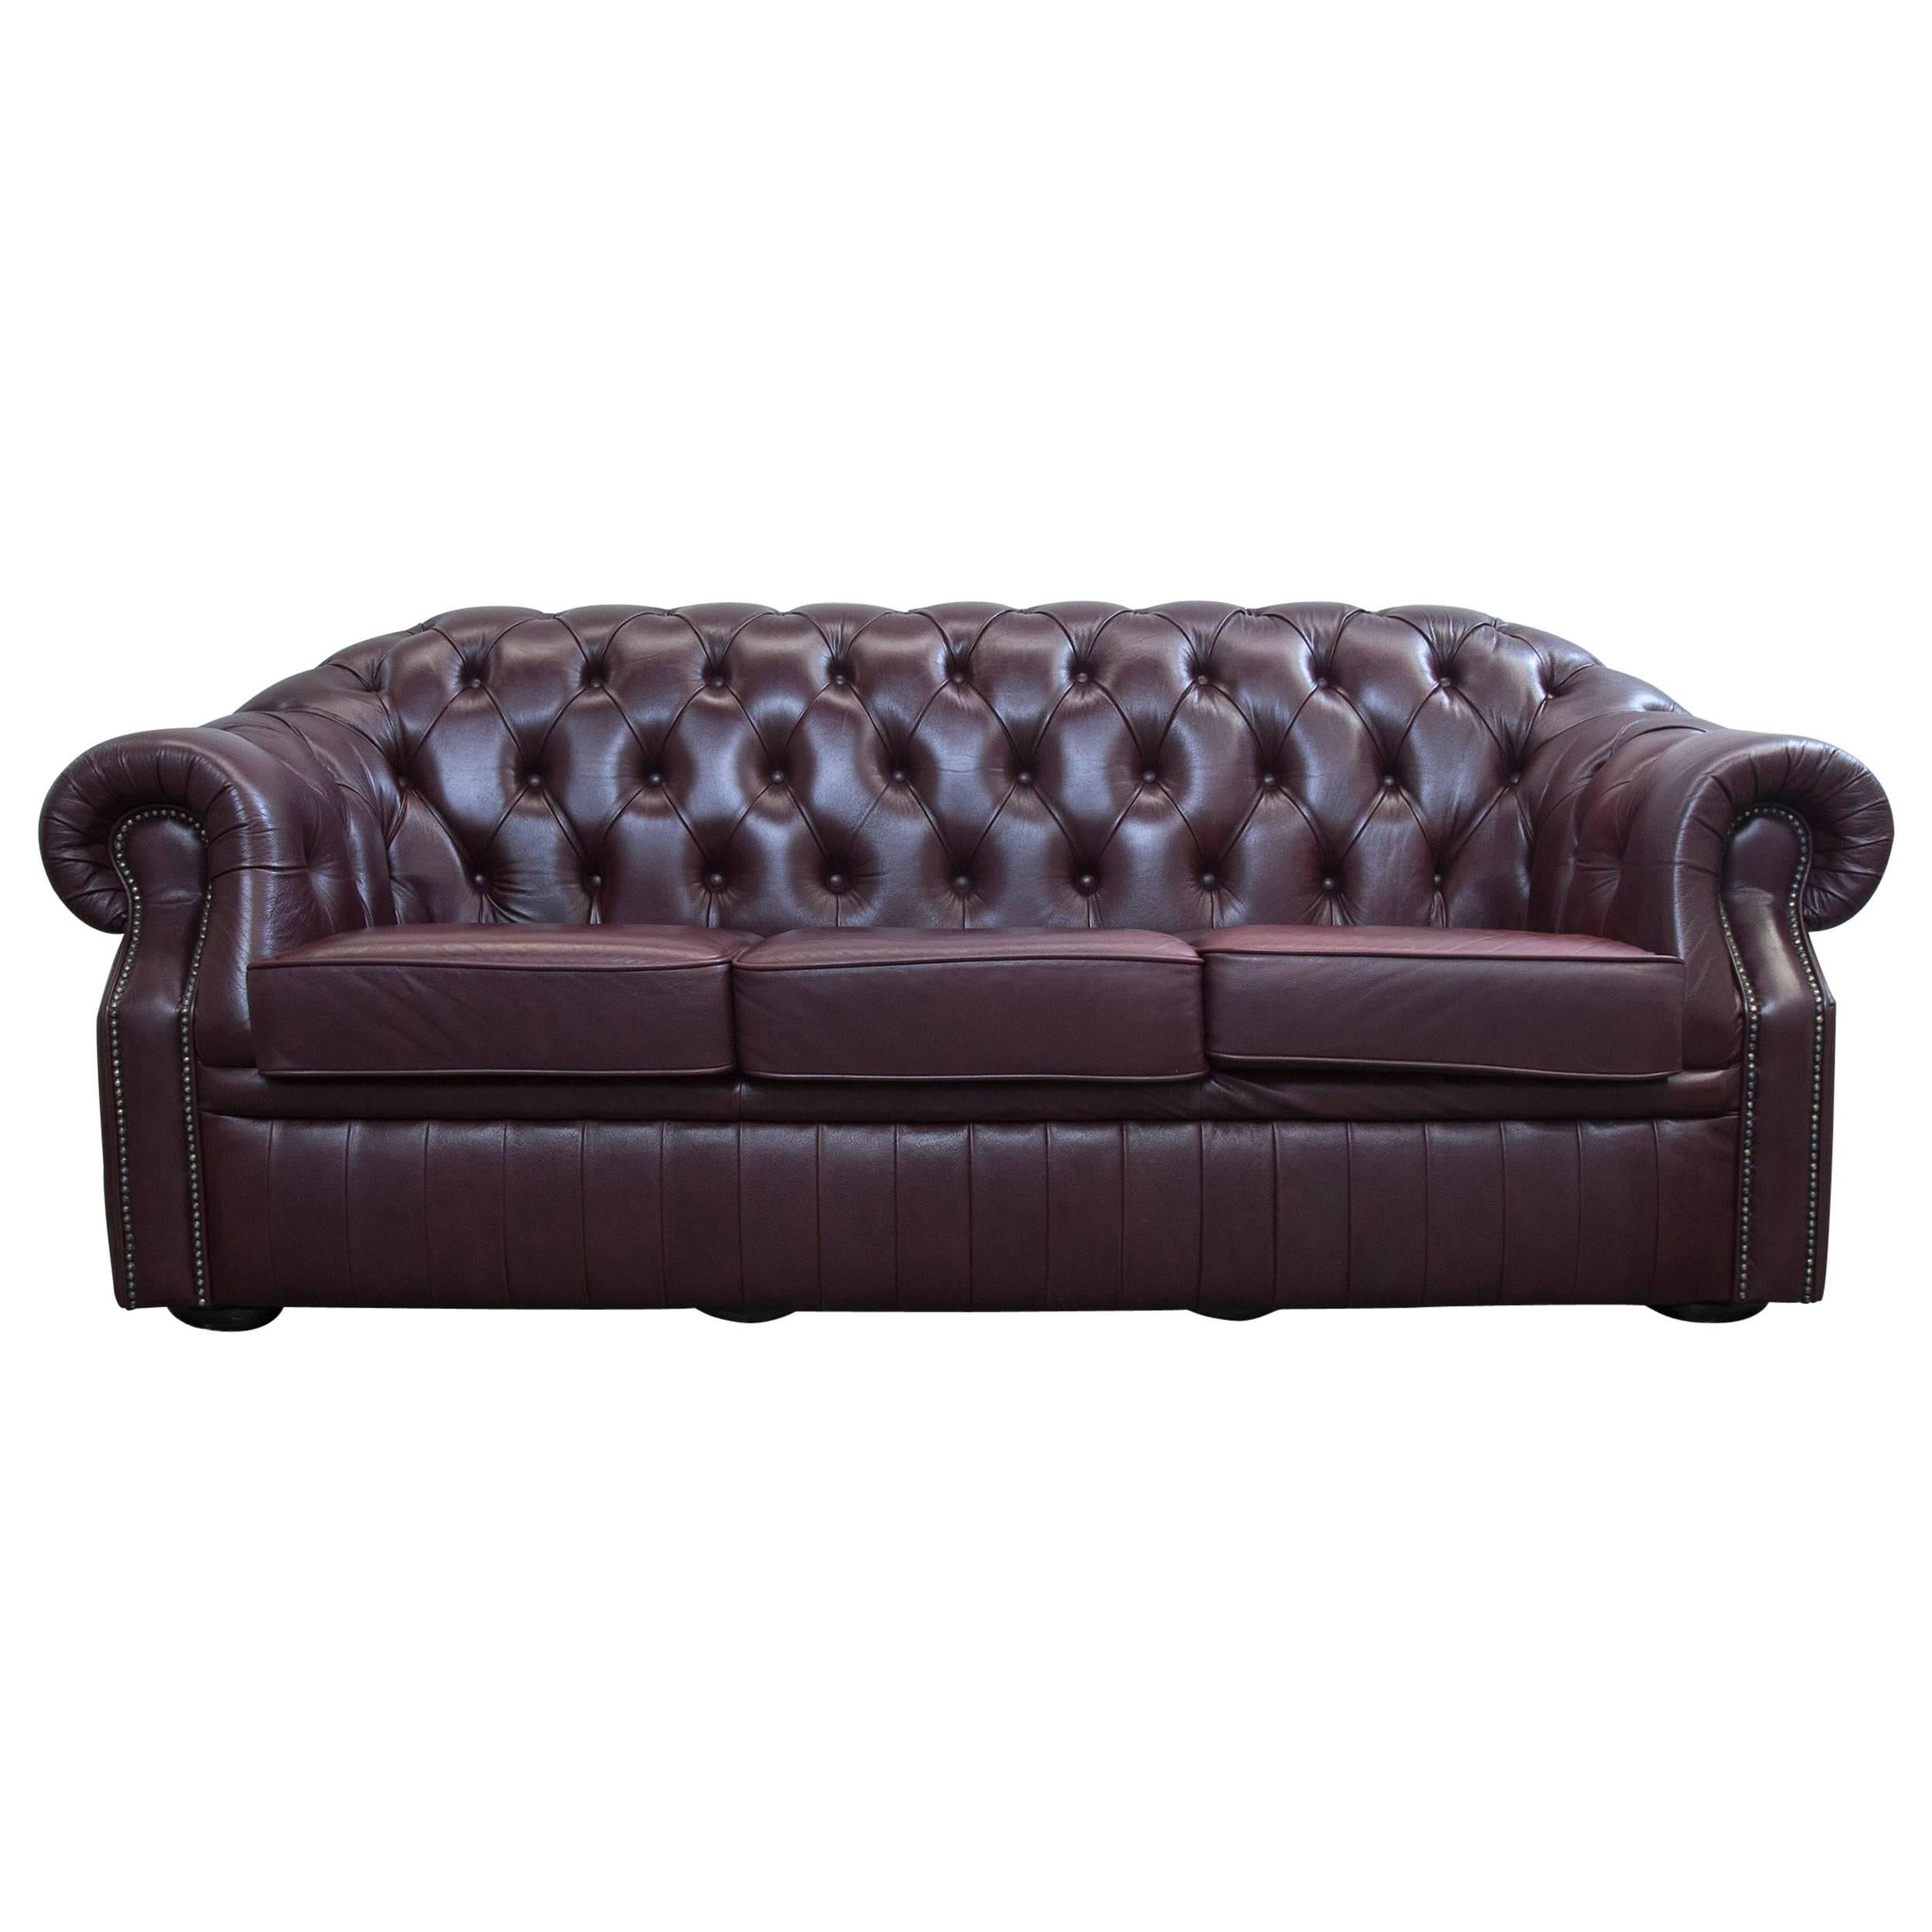 Chesterfield Sofa Red Brown Leather Three-Seat Couch Retro Vintage